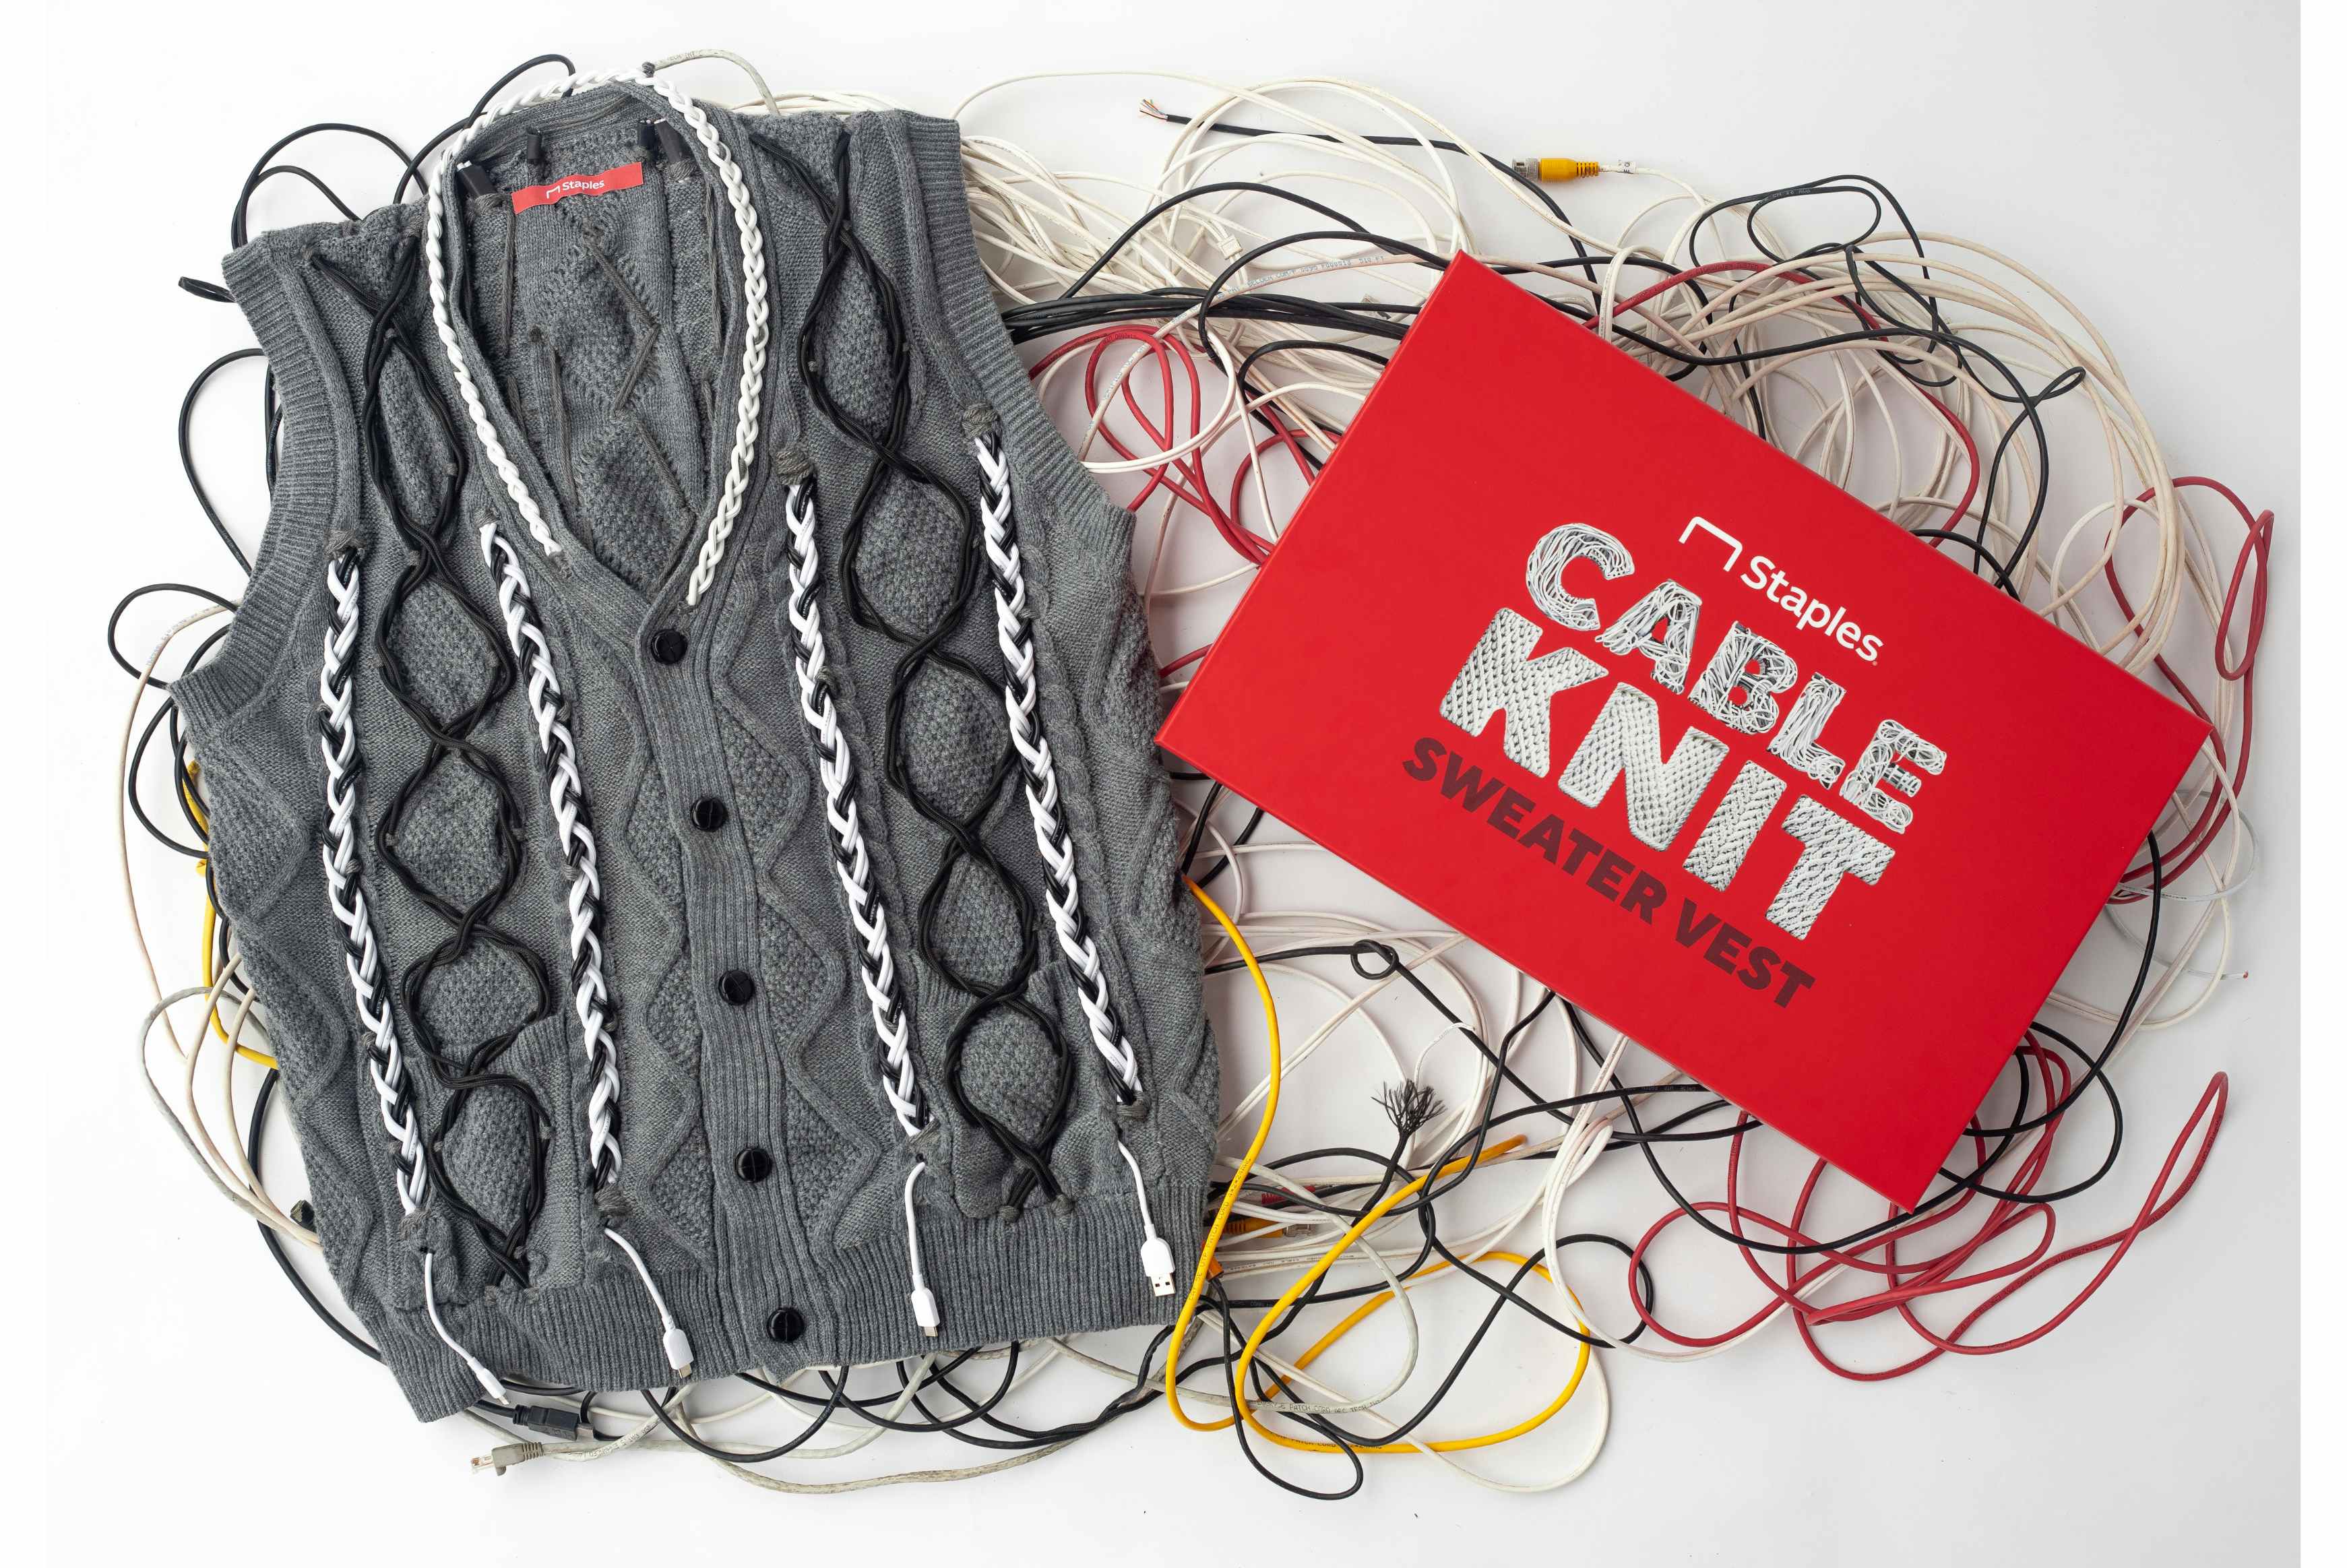 Staples Cable Knit Sweater Vest 1